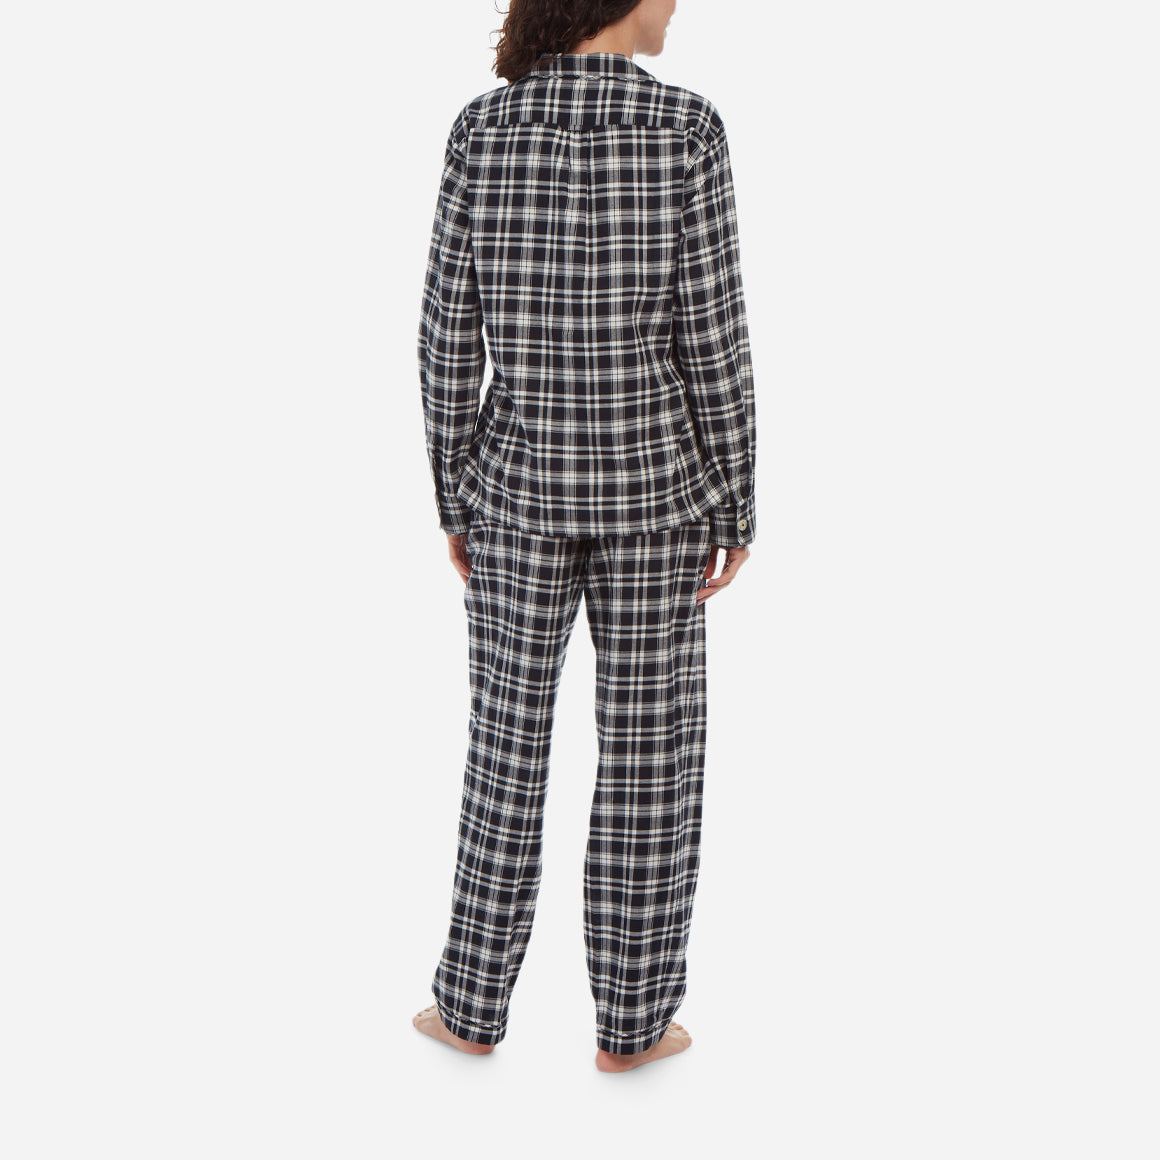 Rear facing model image wearing black and white plaid flannel long pajama set. 